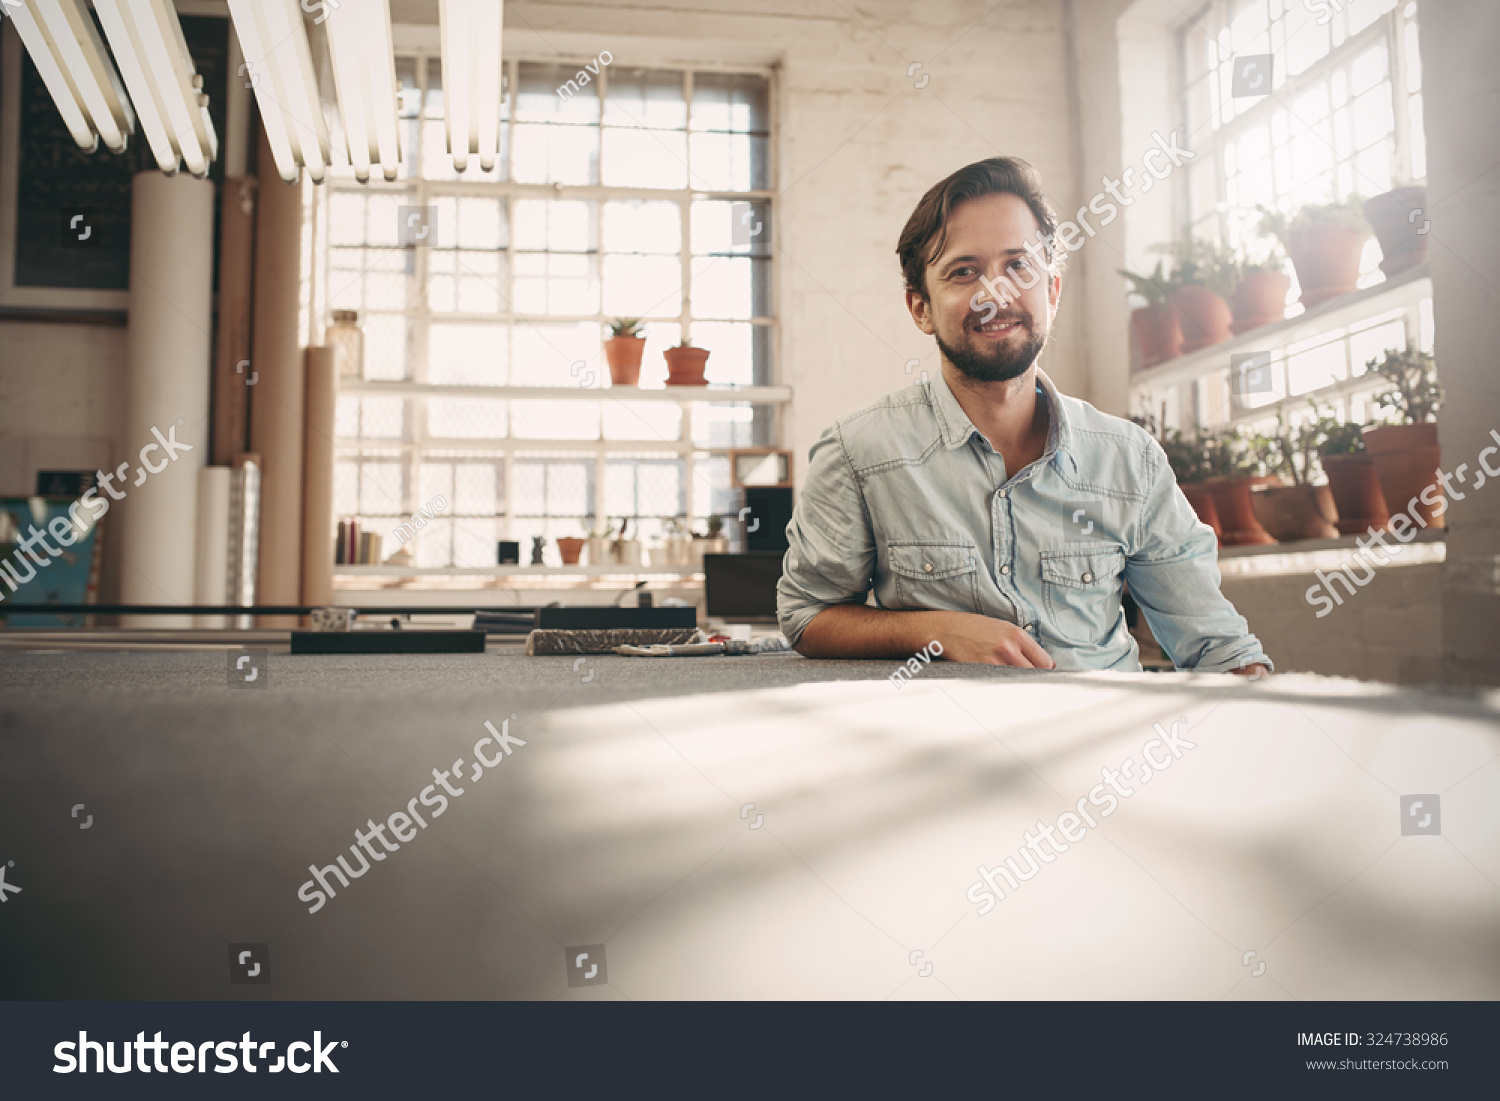 Portrait of a small business owner sitting casually in his worskhop studio looking confident and positive #324738986